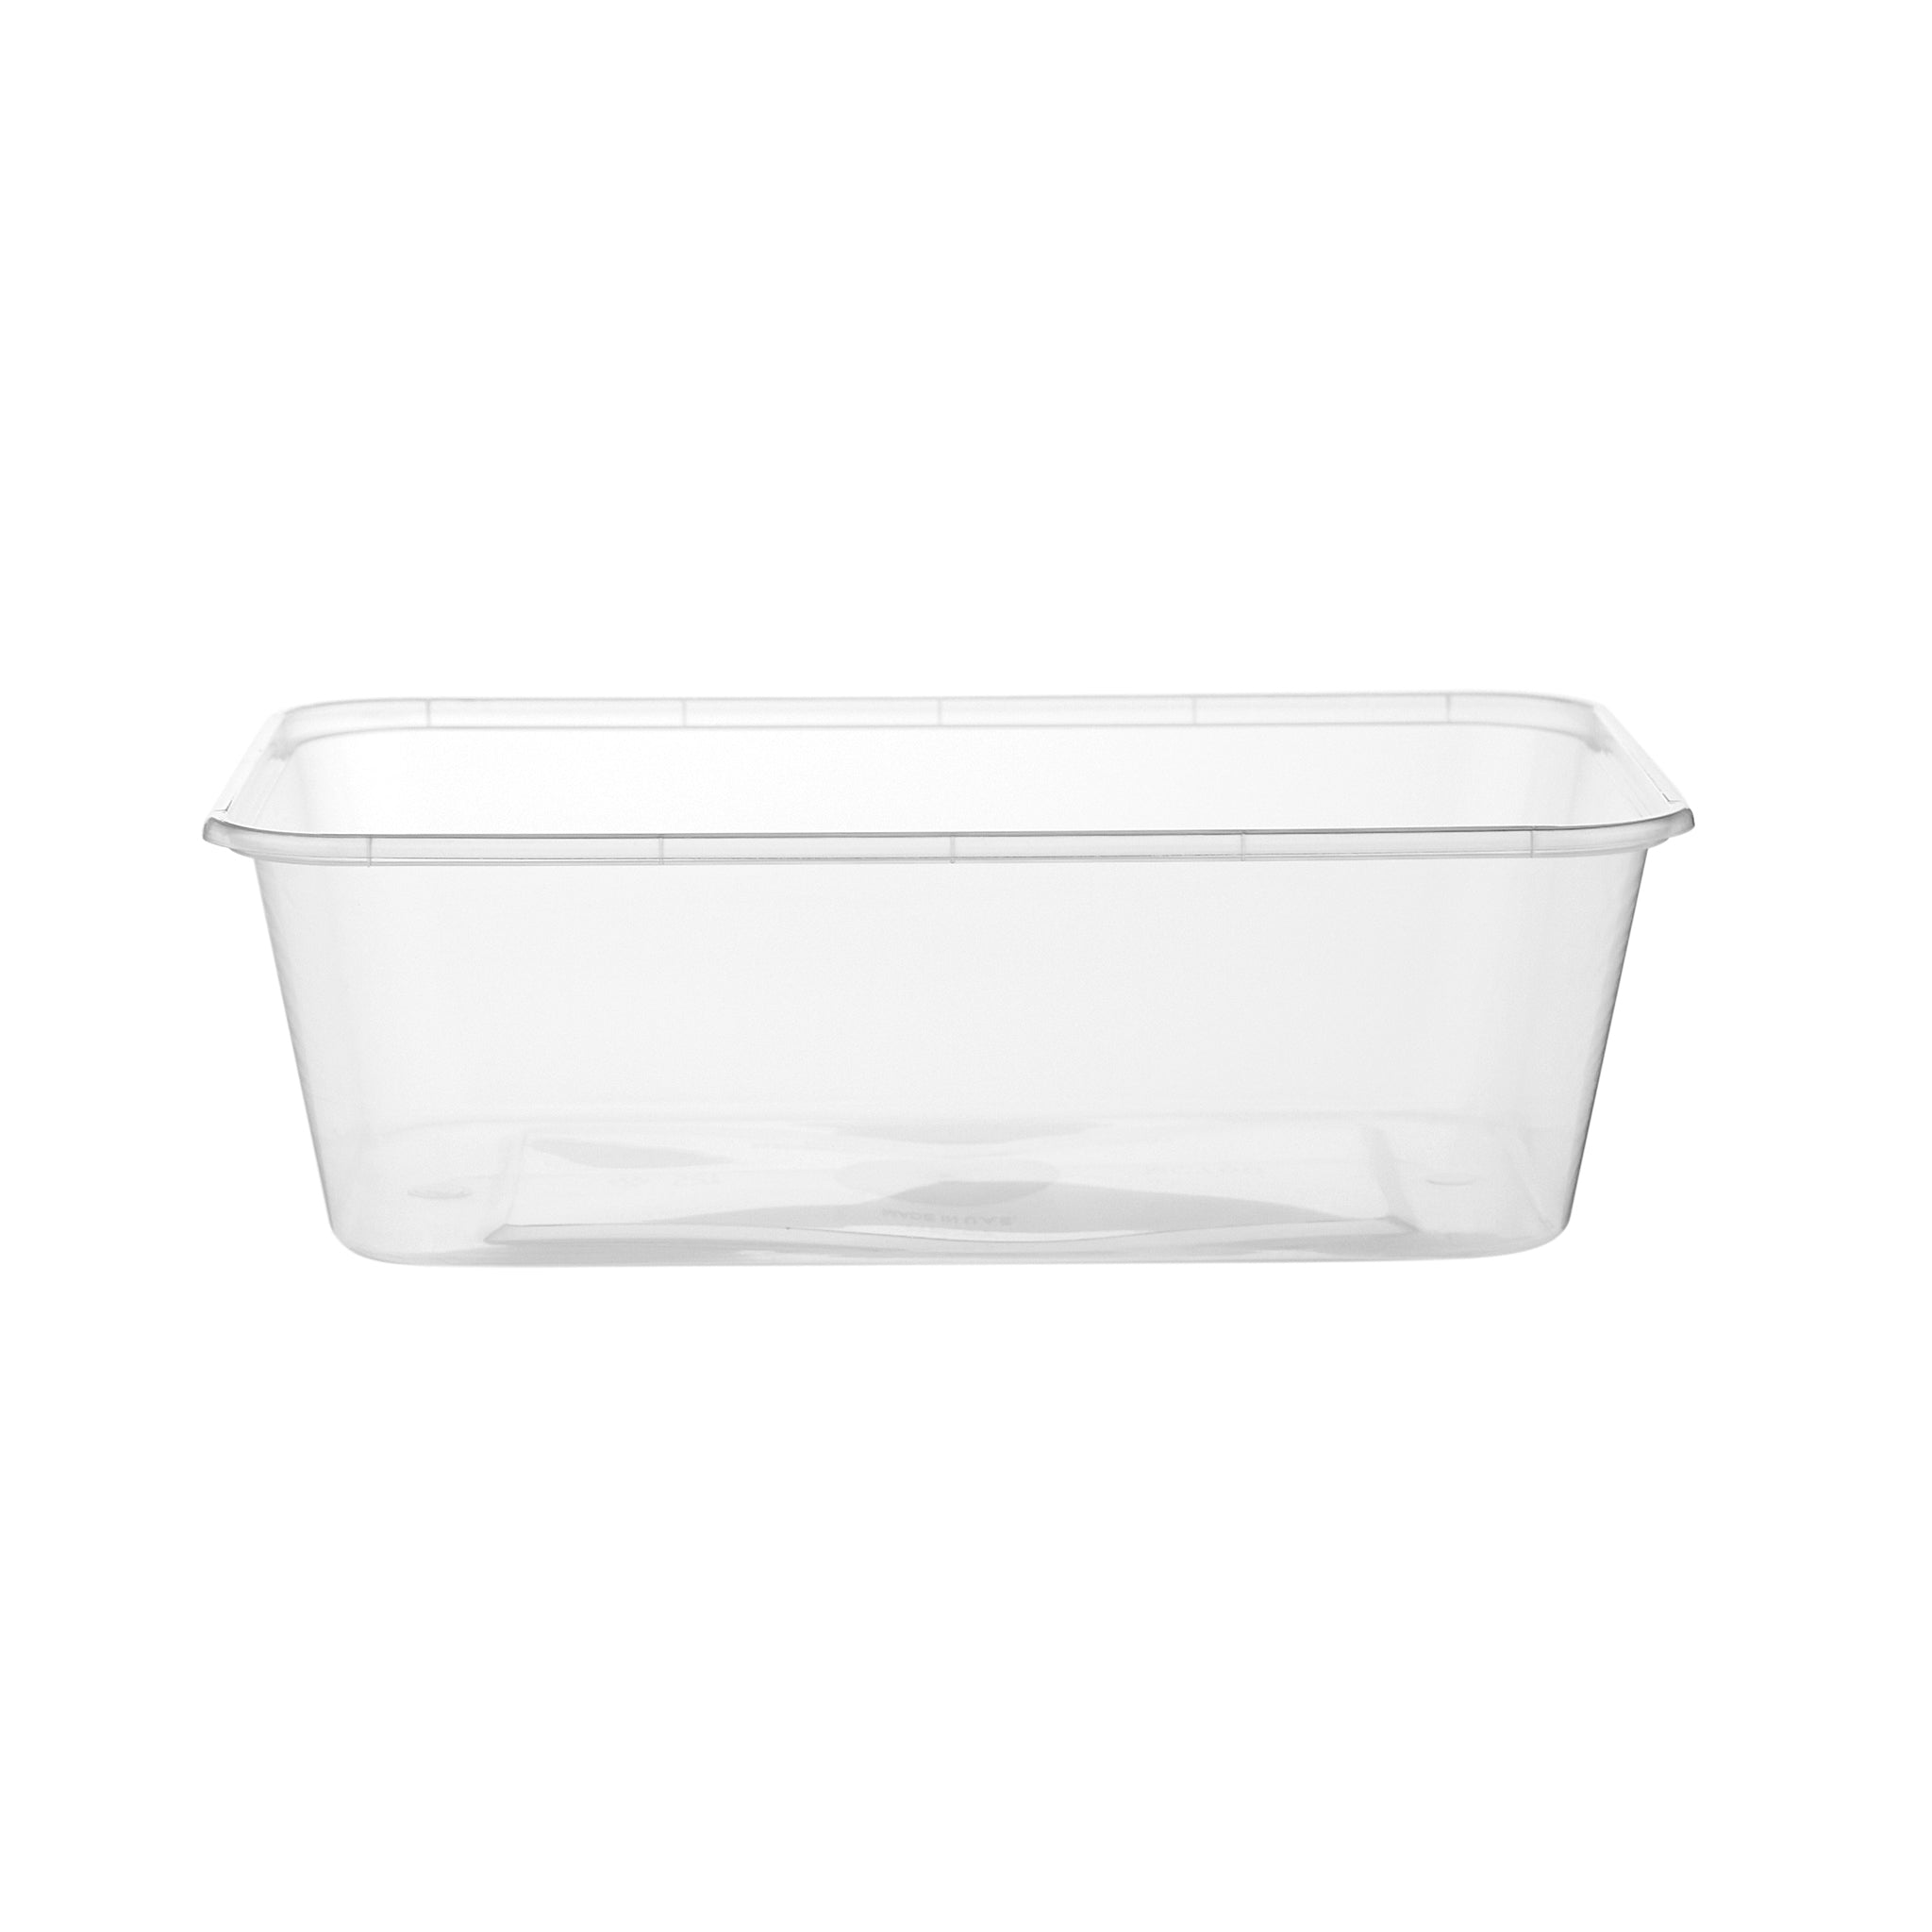 650ml Plastic Food Containers Tubs Clear With Lids Microwave Safe Takeaway